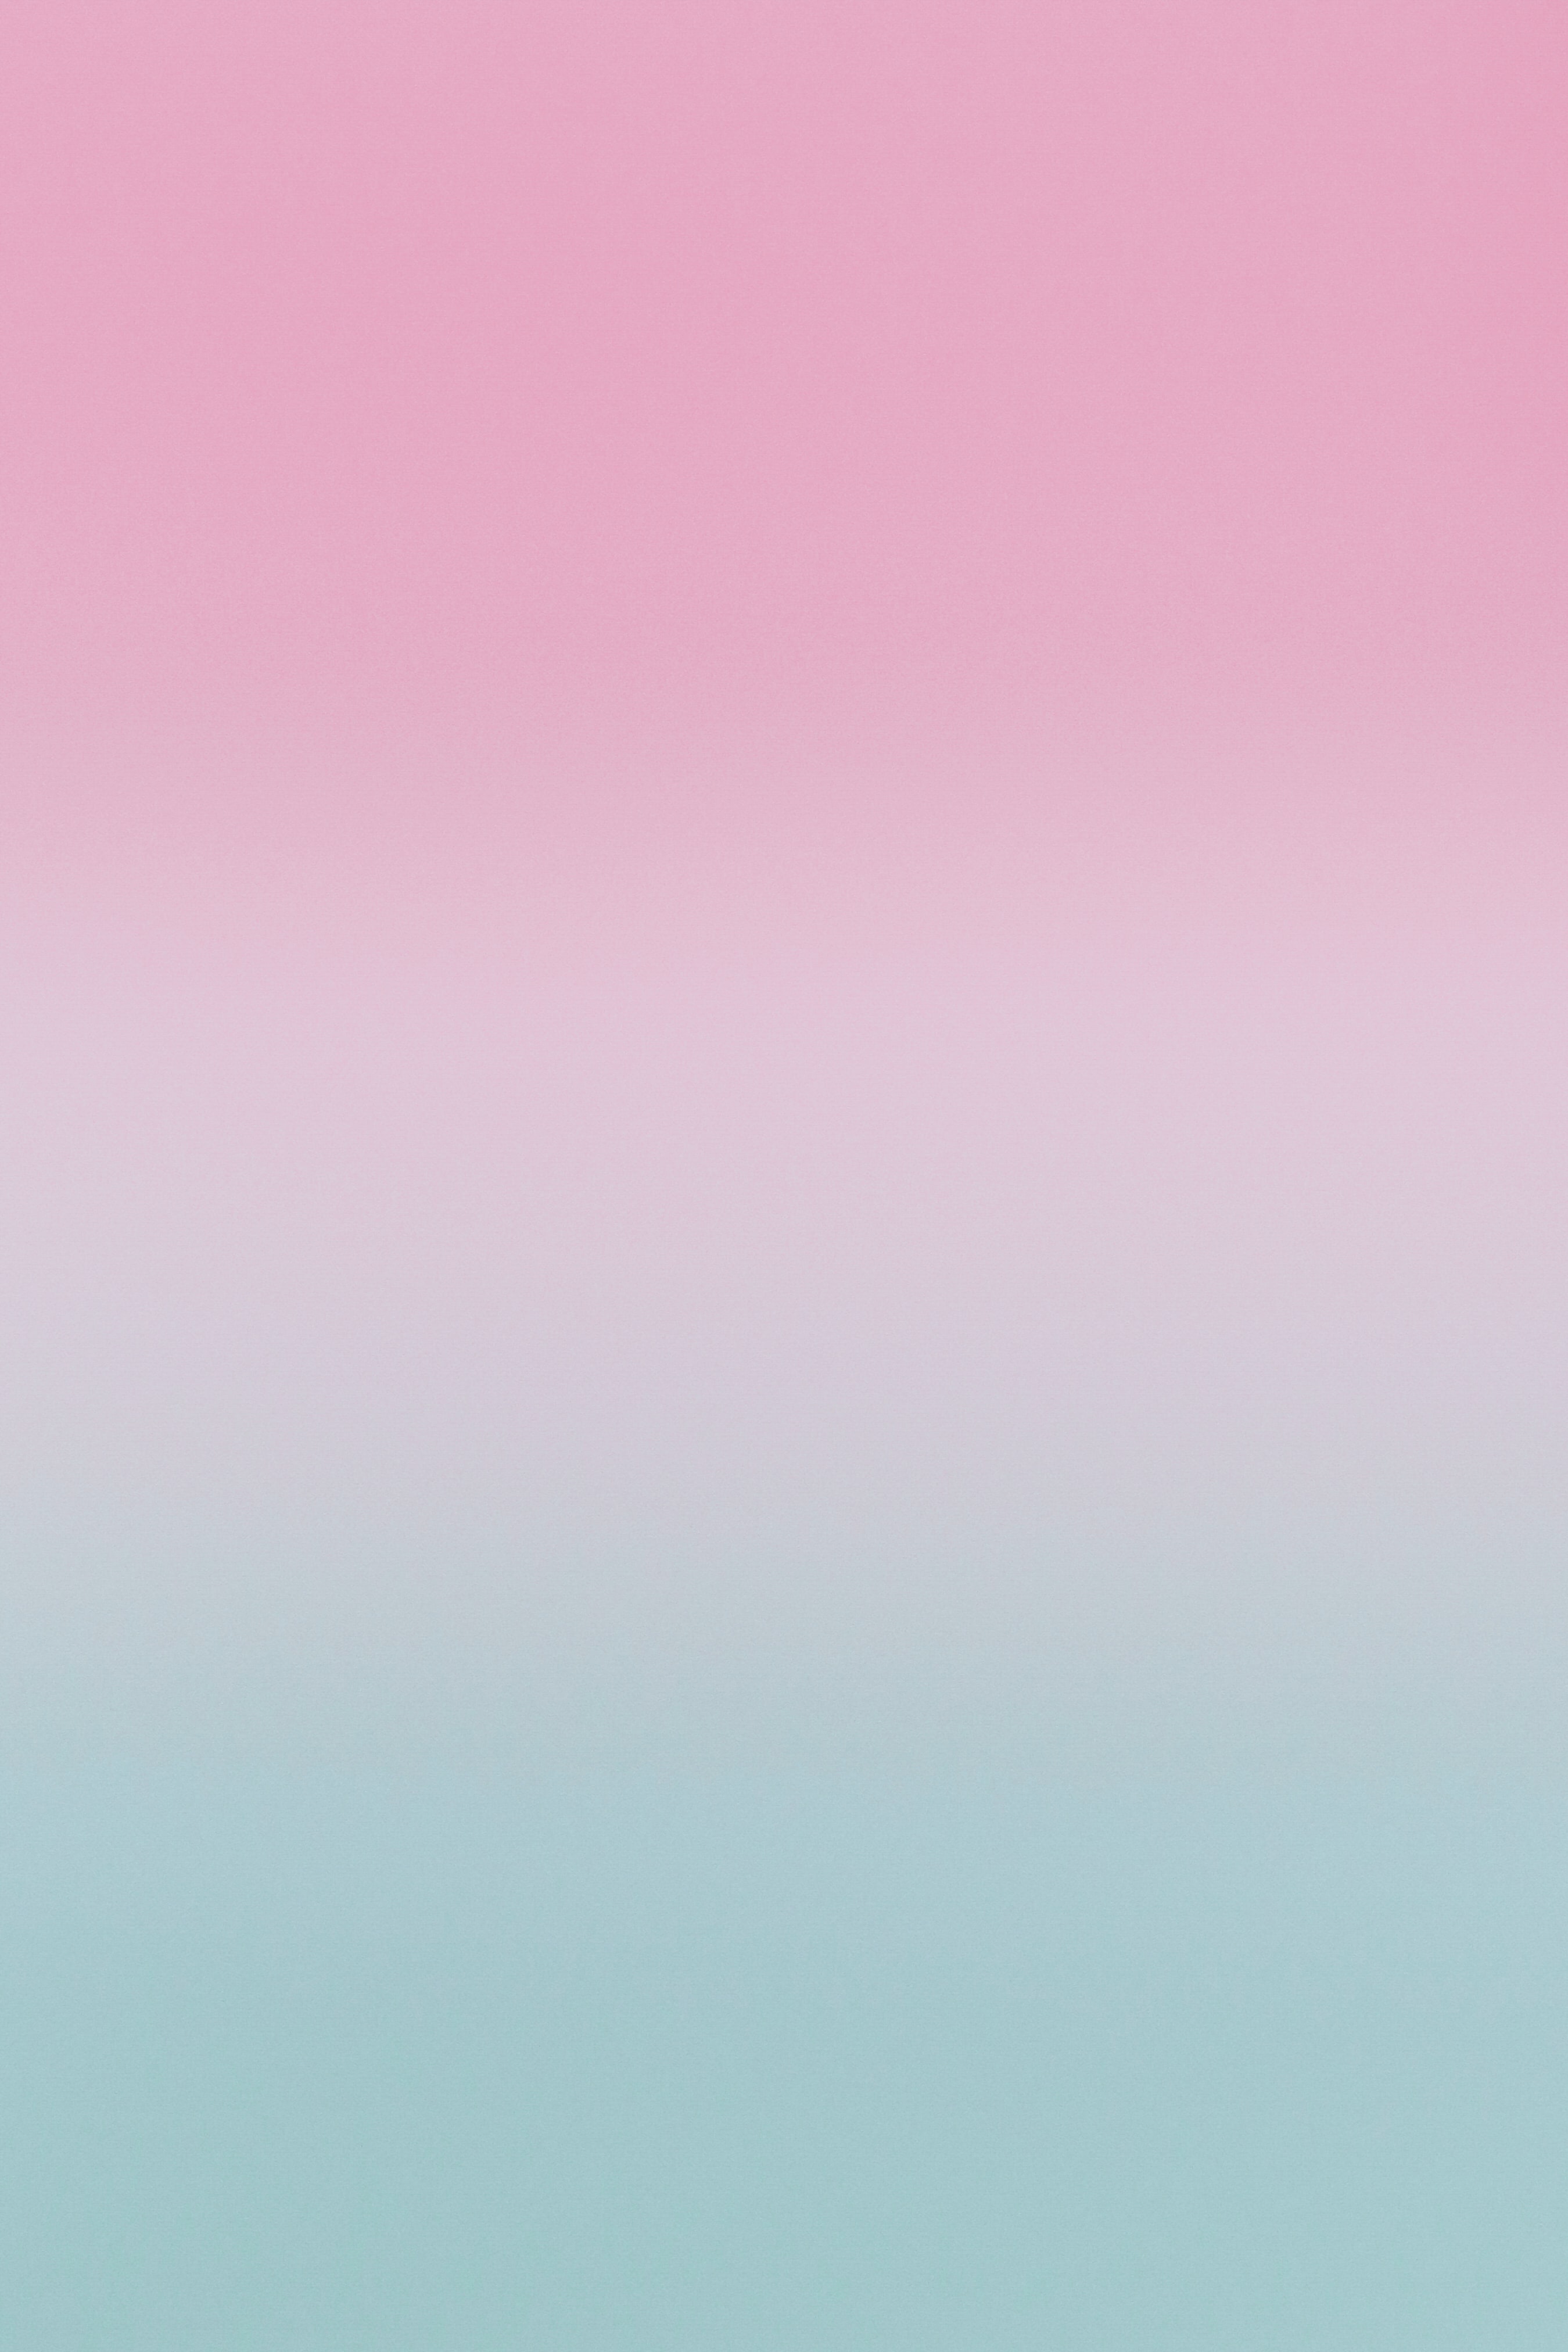 blur, pink, gradient, blue, abstract, smooth